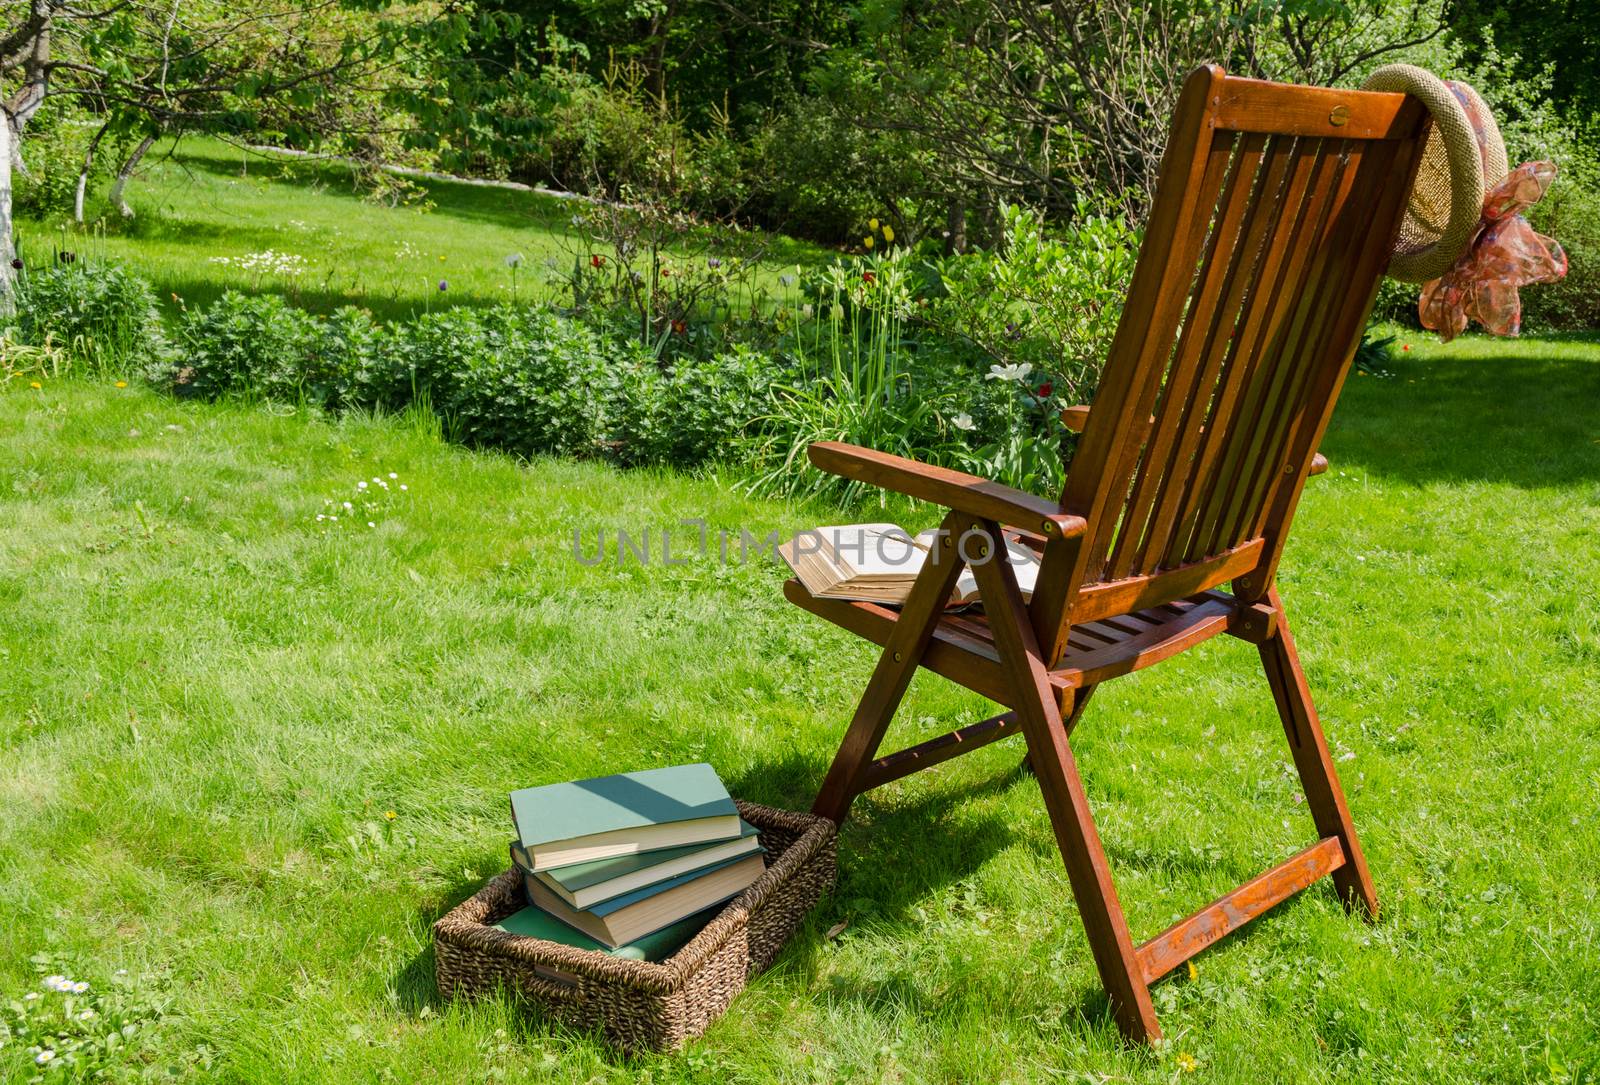 wooden relax chair, books in basket and hat in garden yard in summer day.